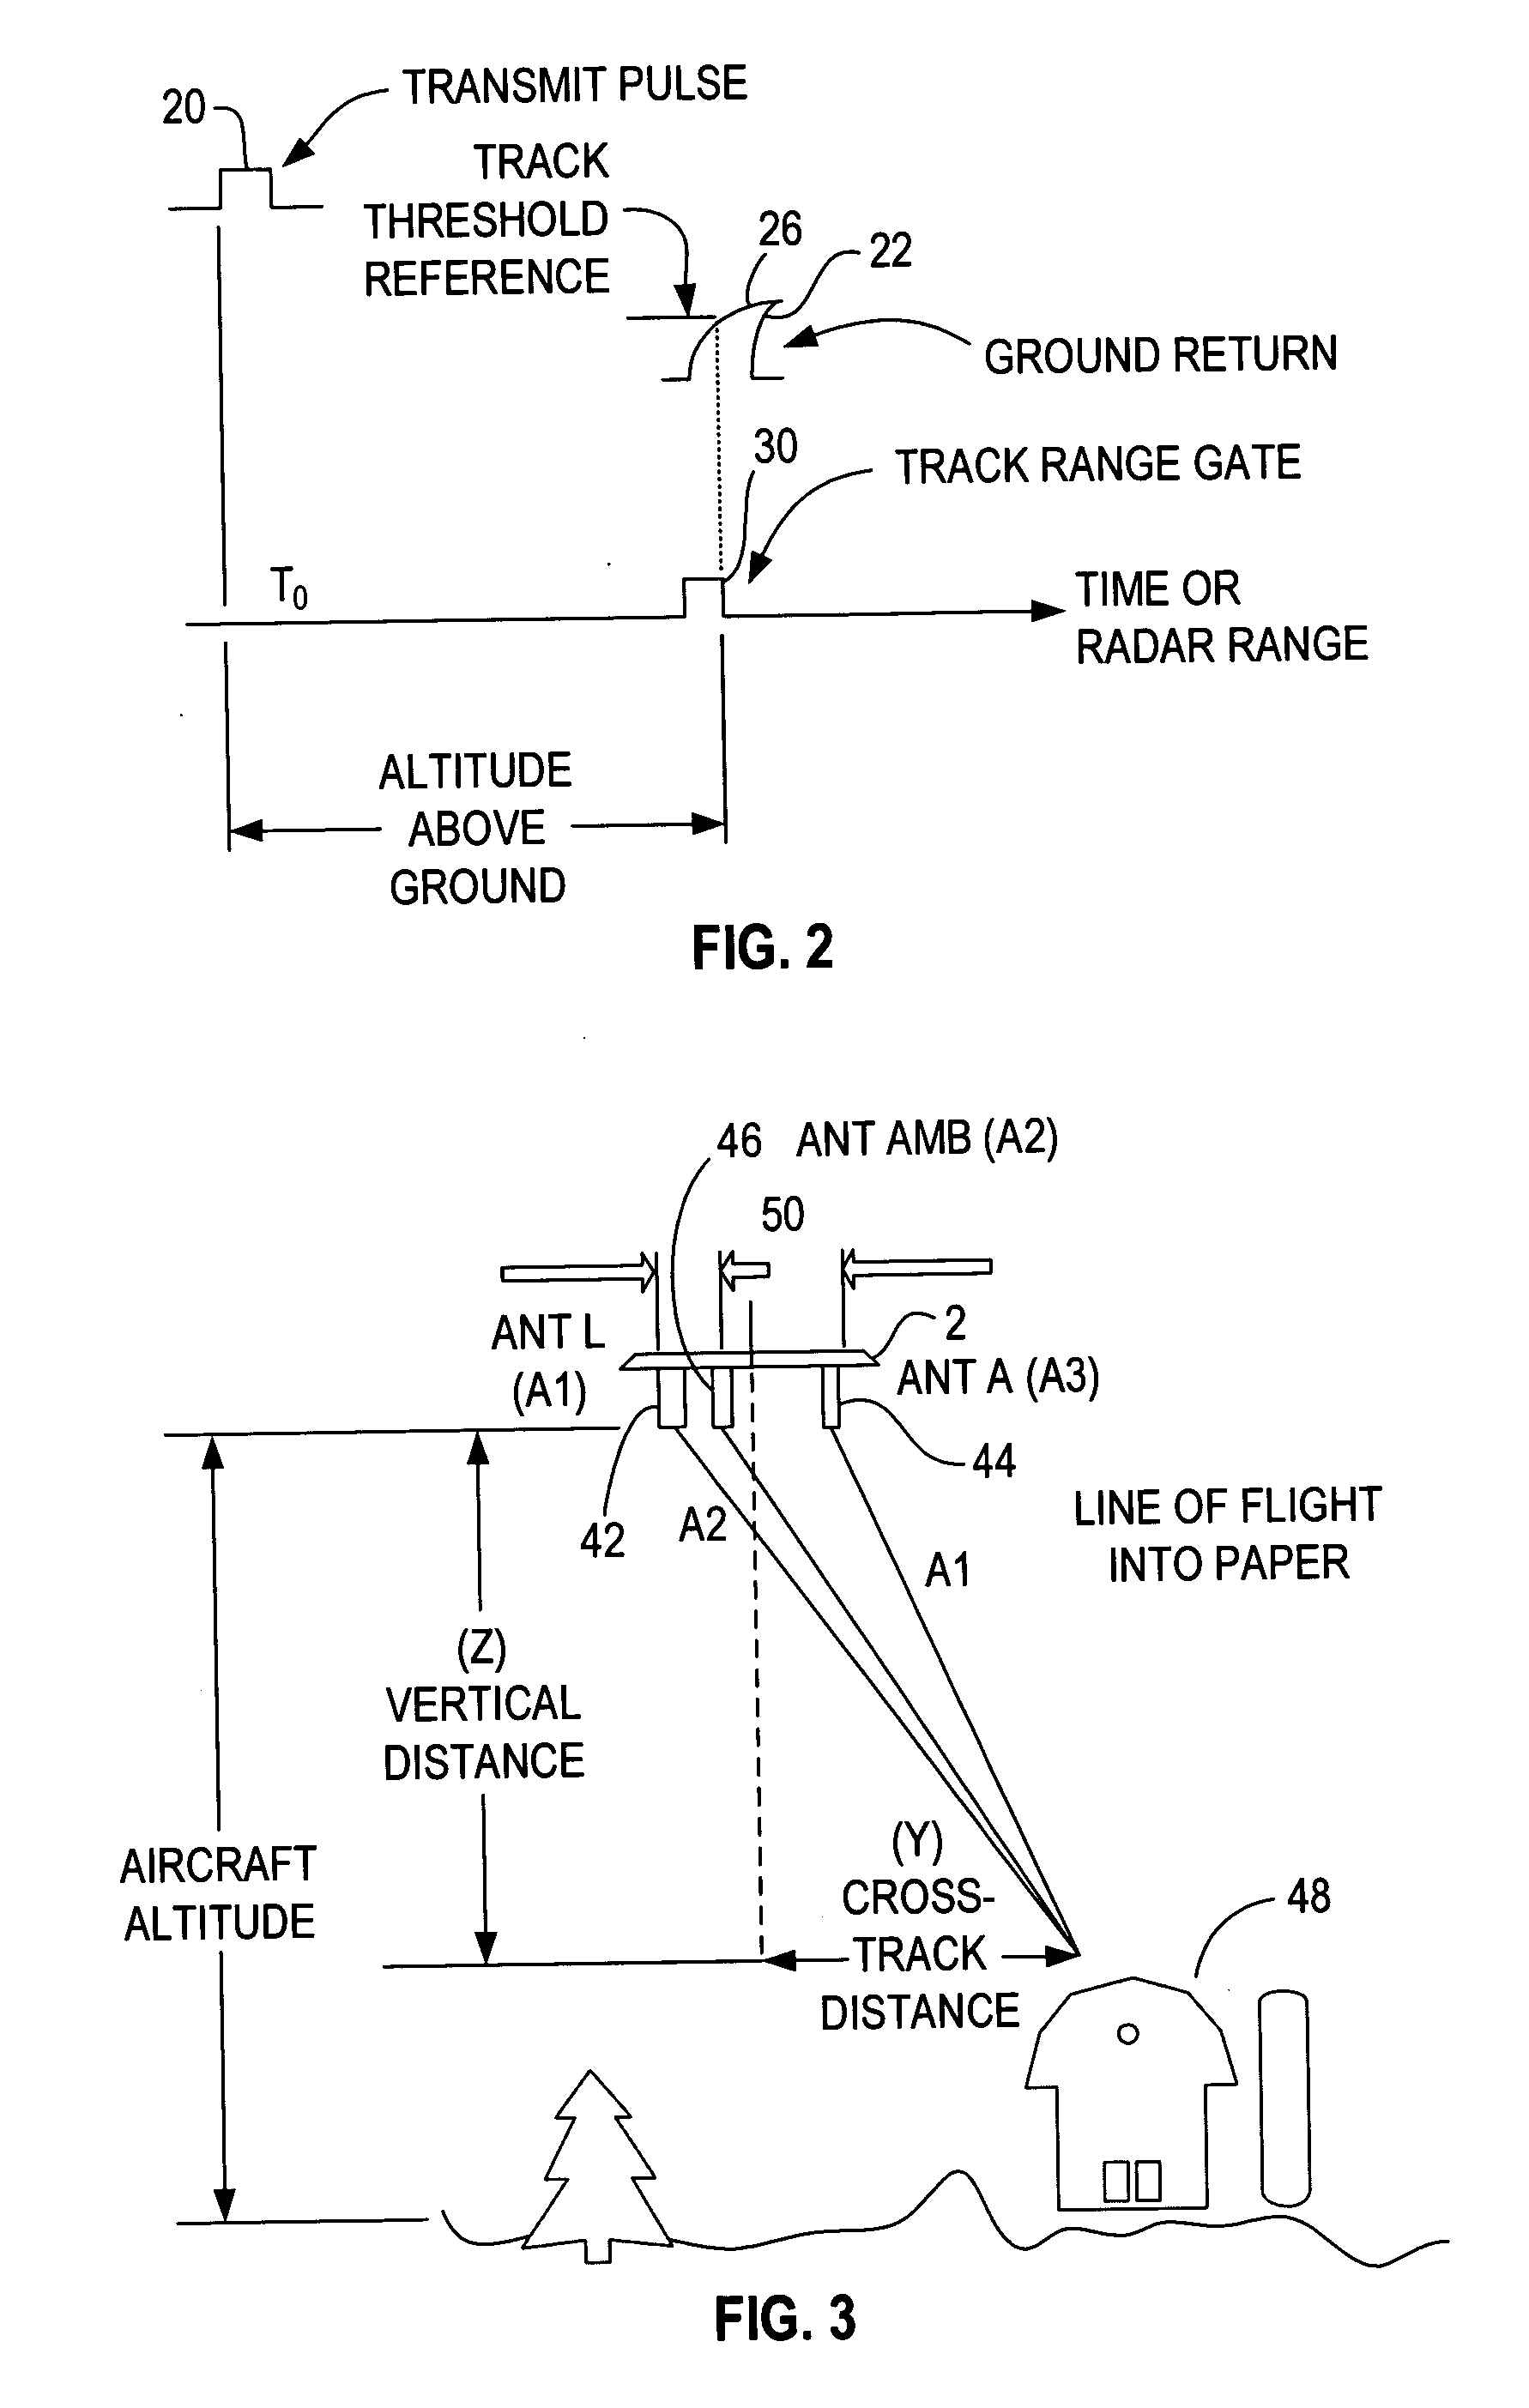 Methods and systems for identifying high-quality phase angle measurements in an interferometric radar system